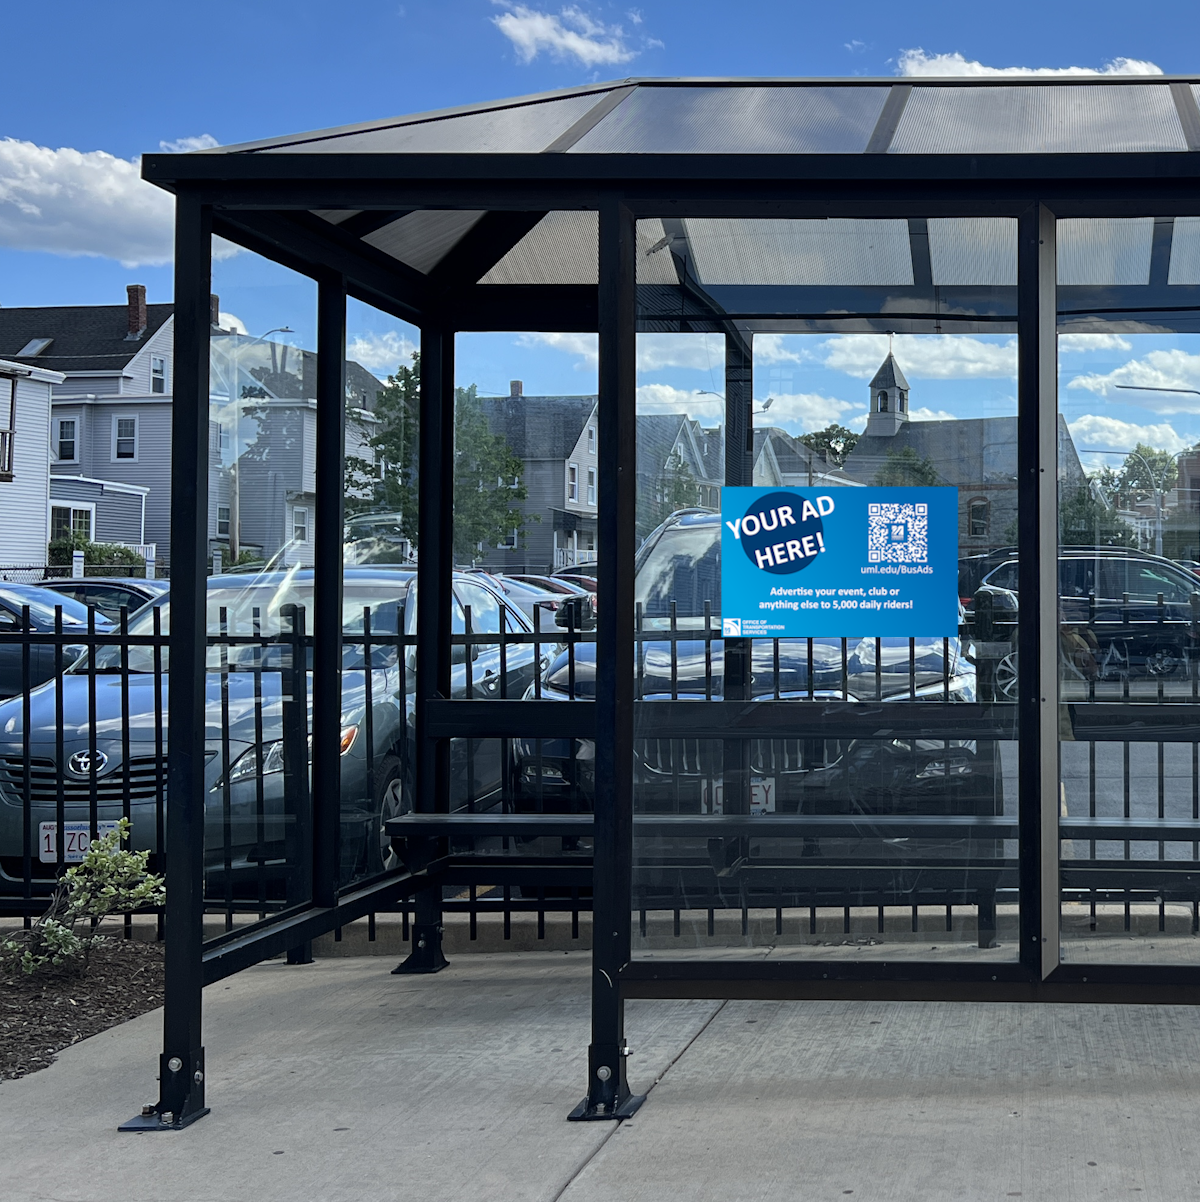 A blue example advertisement is displayed in the window of a bus shelter